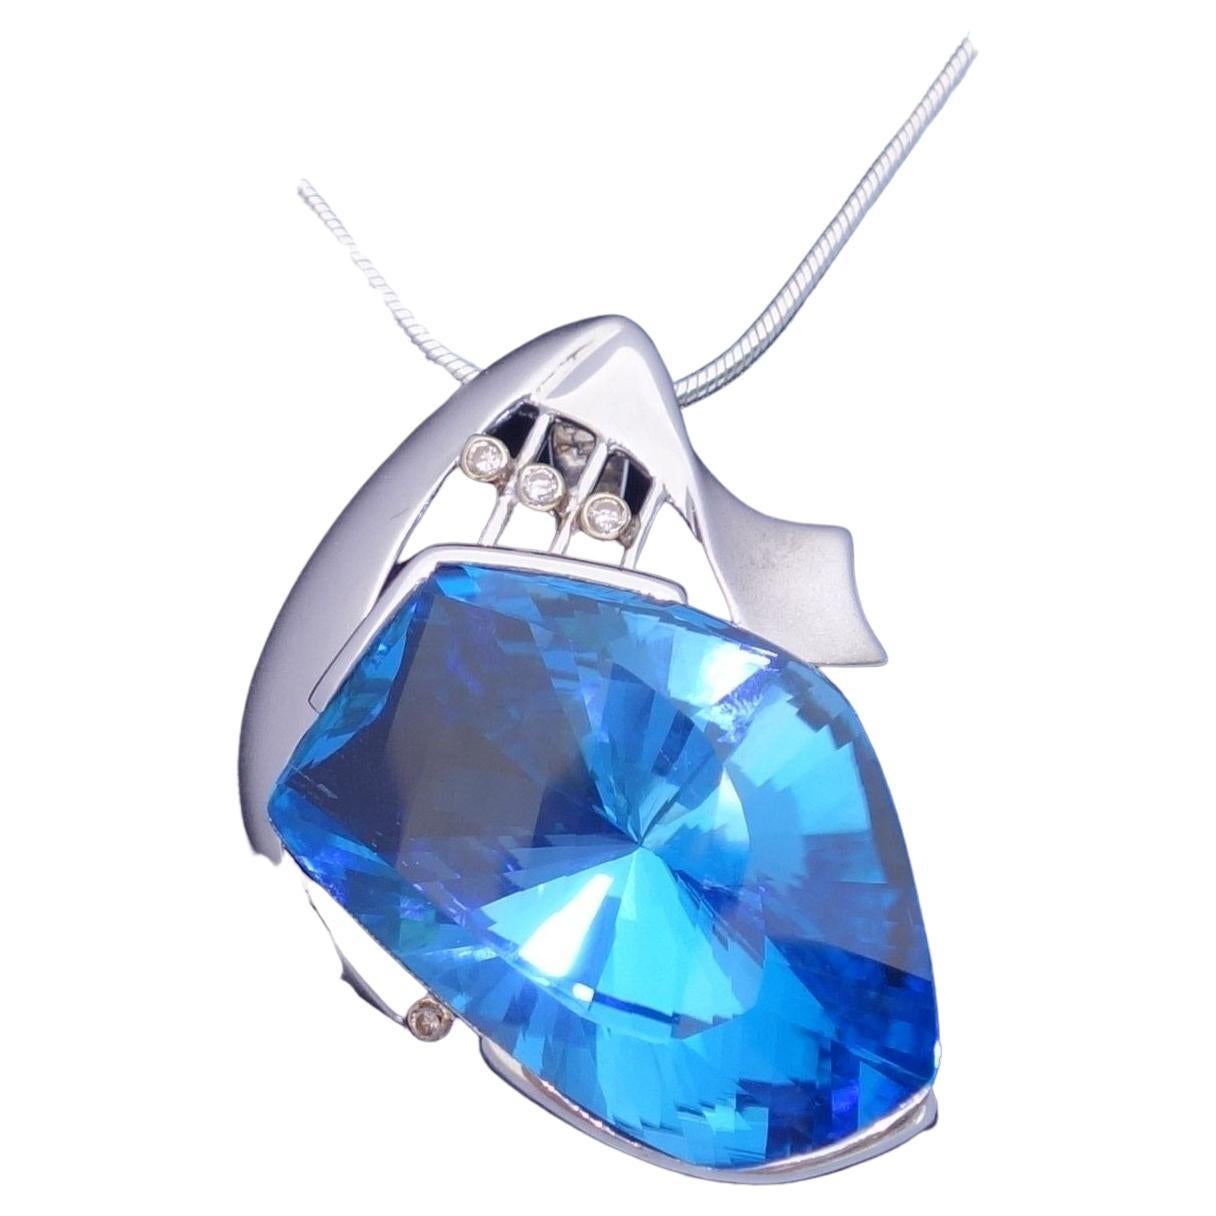 Simply Beautiful! Electric Blue and Diamond Gold and Sterling Silver Pendant Necklace. Centering a Fancy cut Electric Blue Topaz, Stone Size: 33mm x 22mm. Accented by 2mm 3 small Natural Diamonds. Suspended from an 18” long Sterling Silver 1.6mm